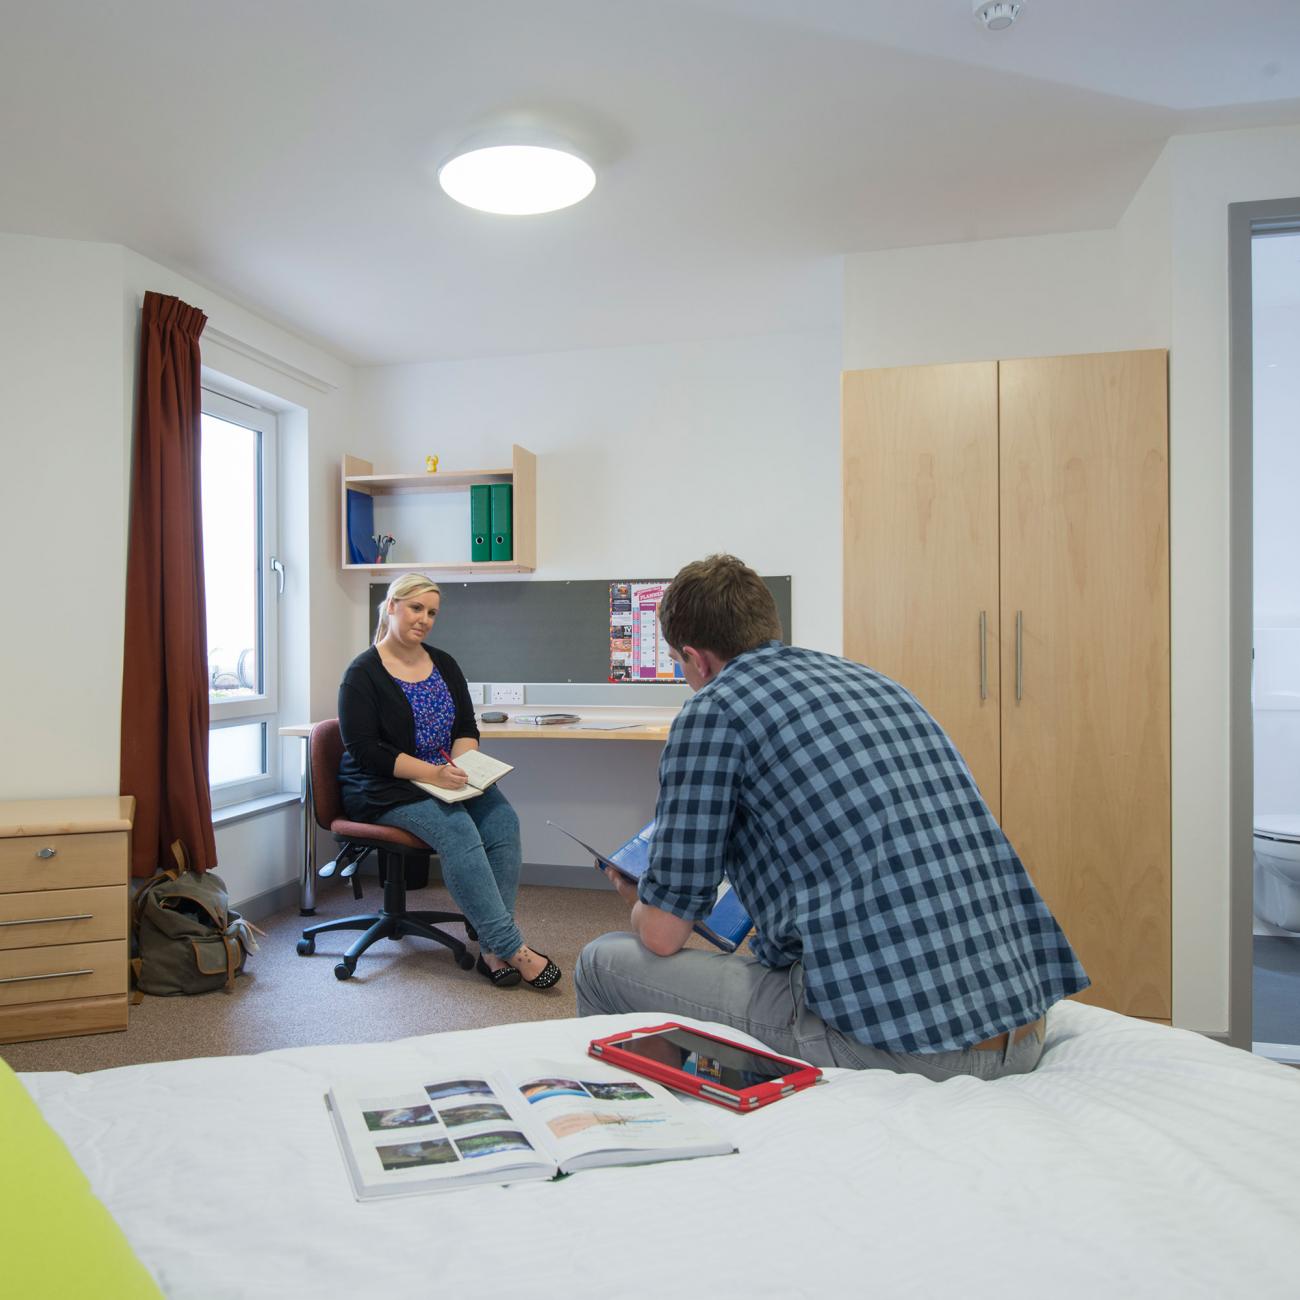 Two students sat talking in a large spacious bedroom. A double bed, desk and open door to a bathroom can be seen.